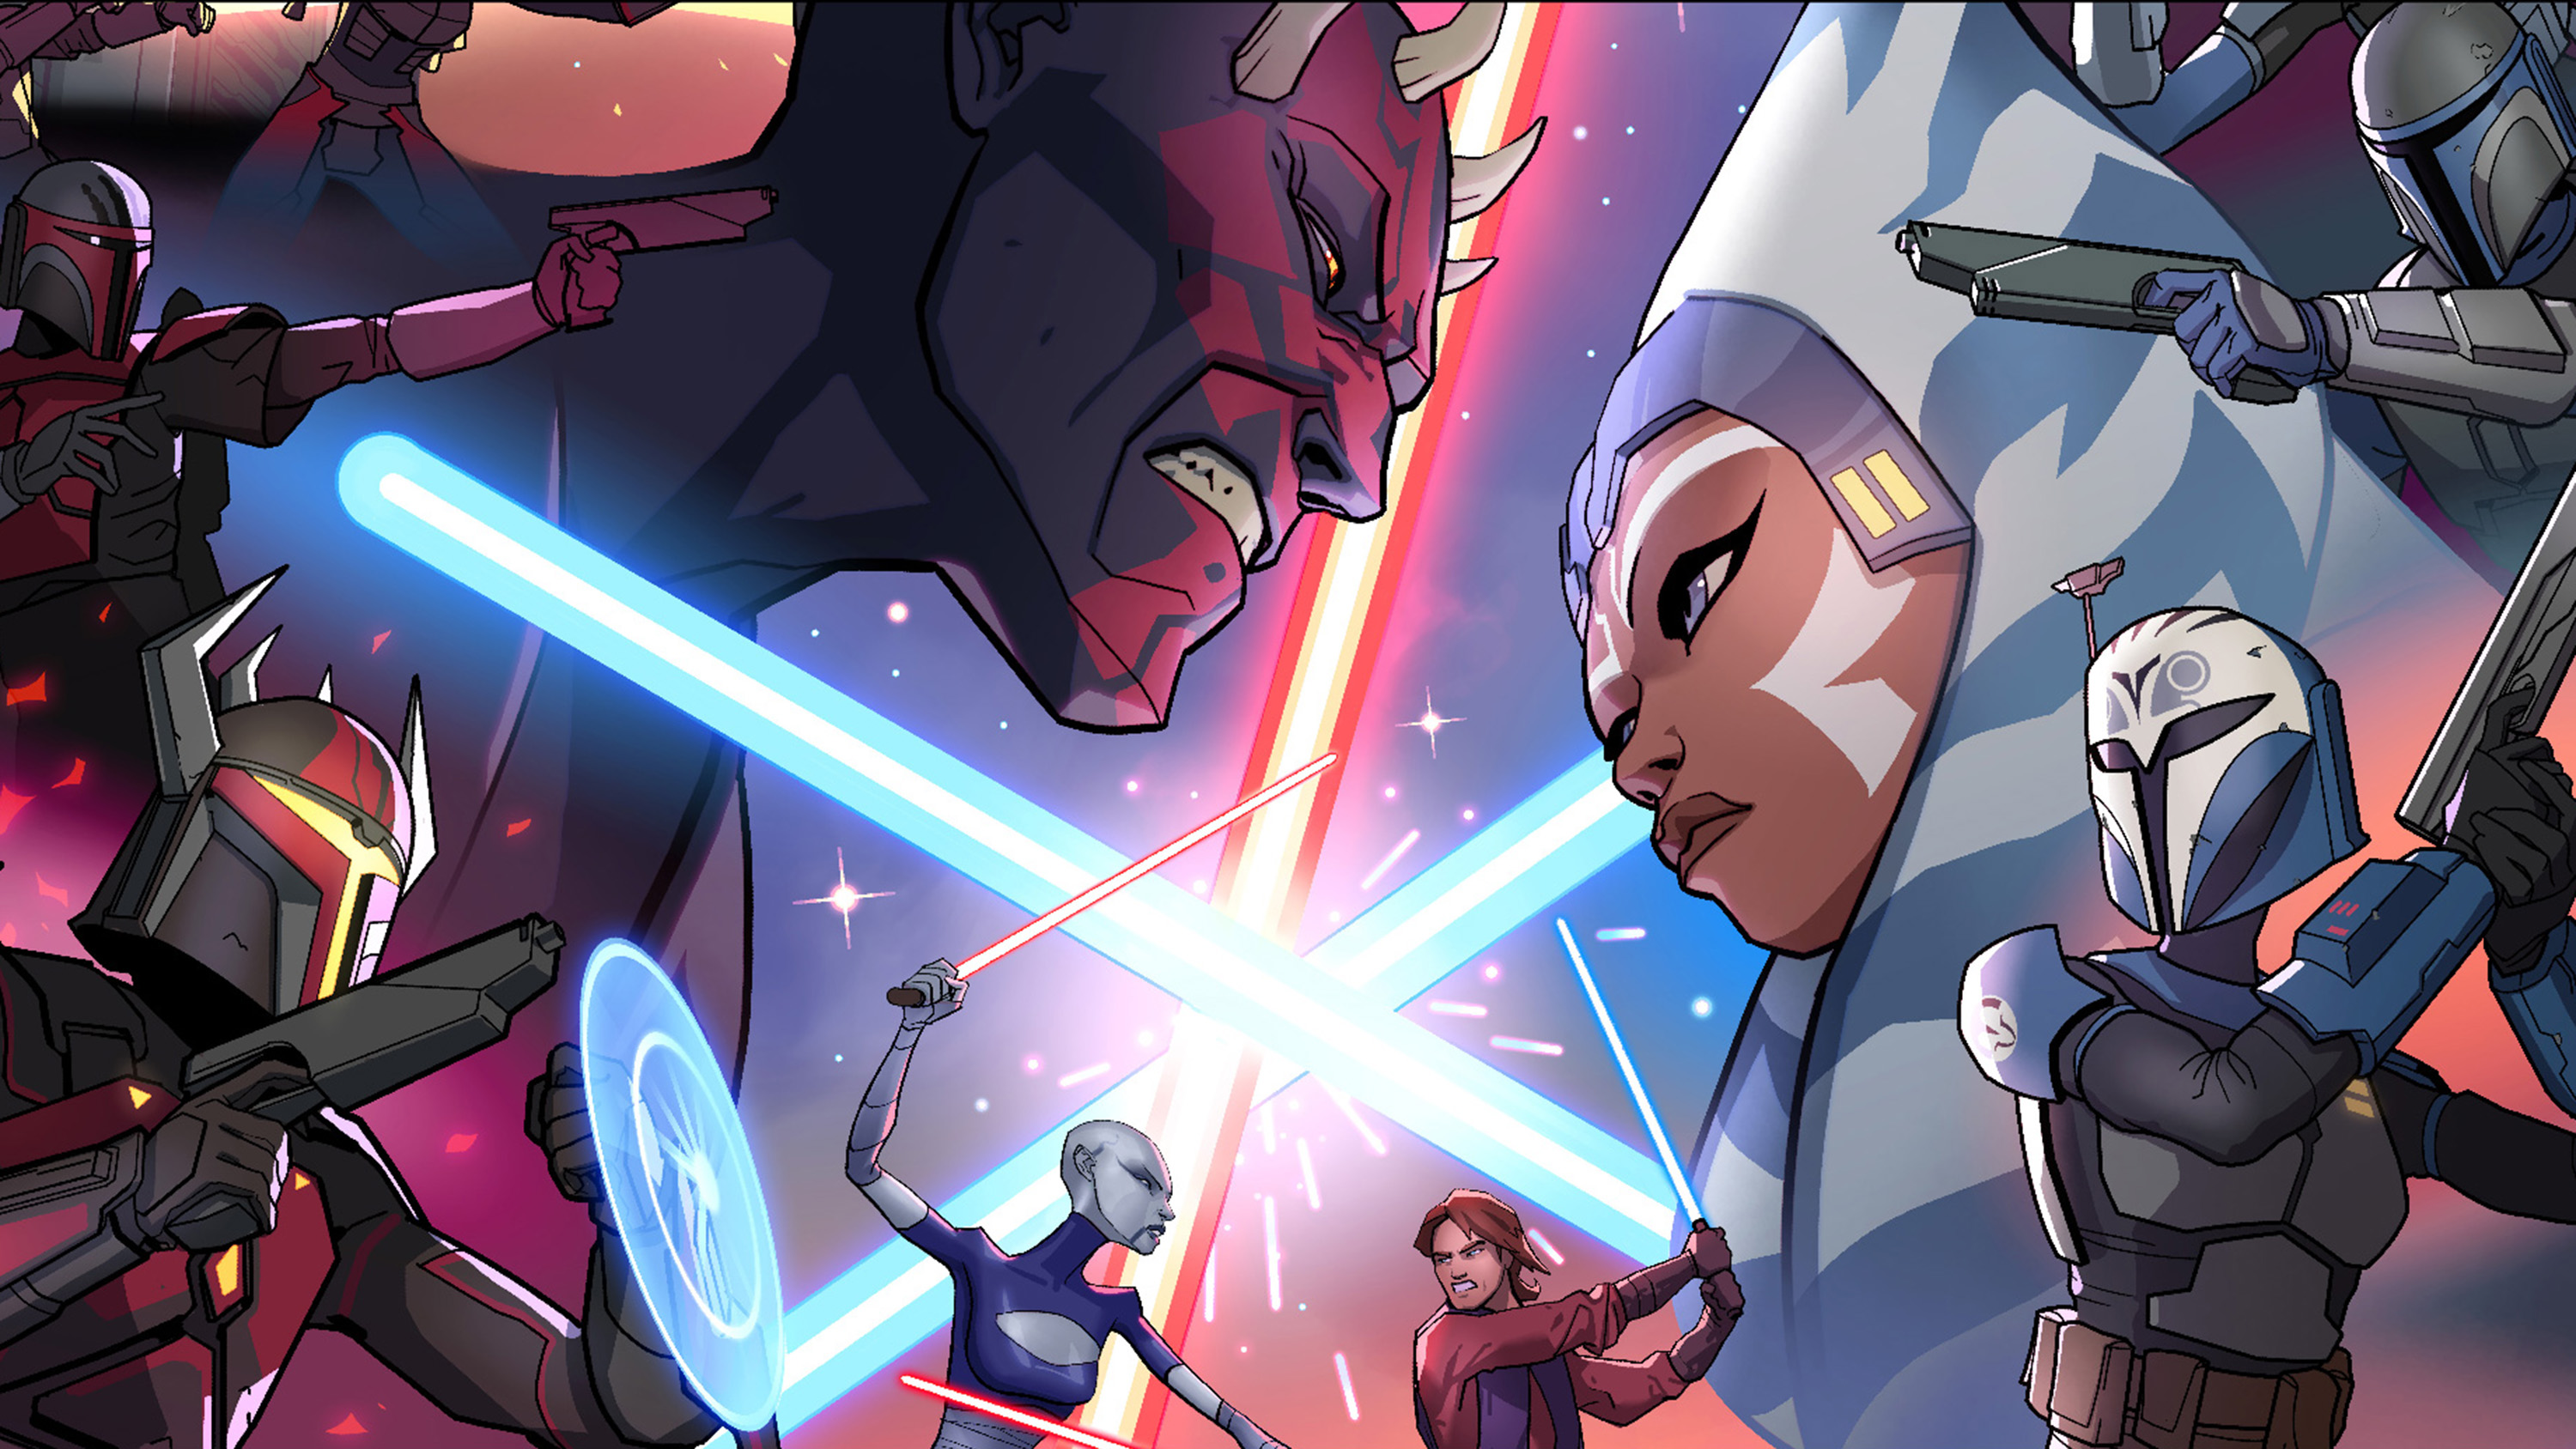 Ahsoka Tano and Darth Maul clash sabers in key art for Star Wars: Shatterpoint.